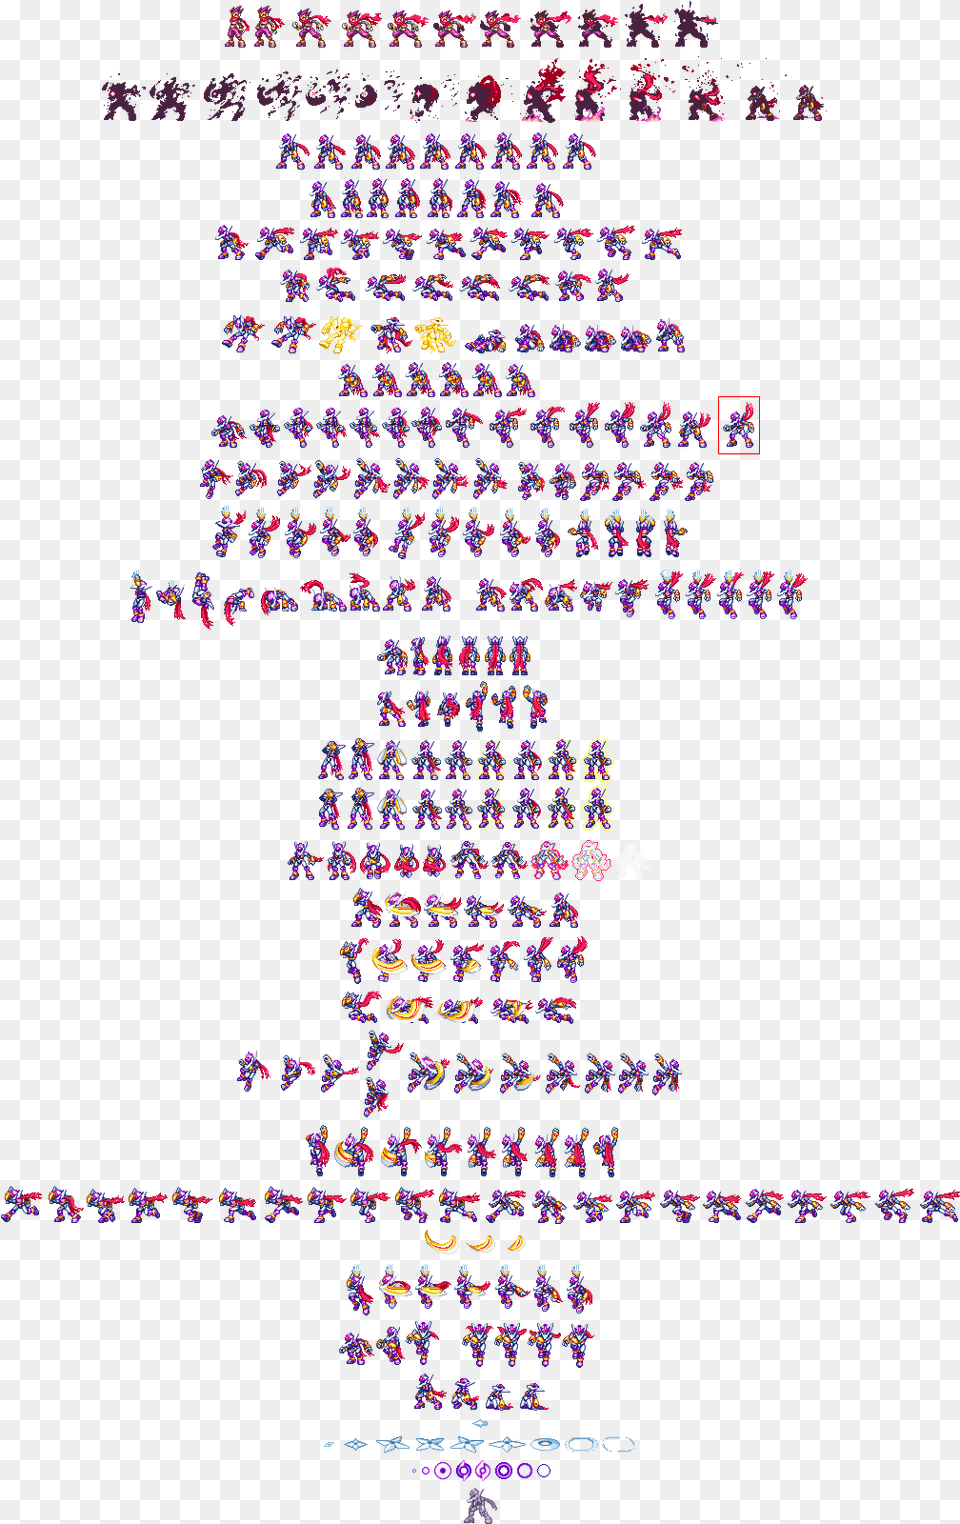 Was A Lazy Andor Forgetful Person And Didn39t Finish Megaman Zx Advent Sprite, Purple, People, Text Png